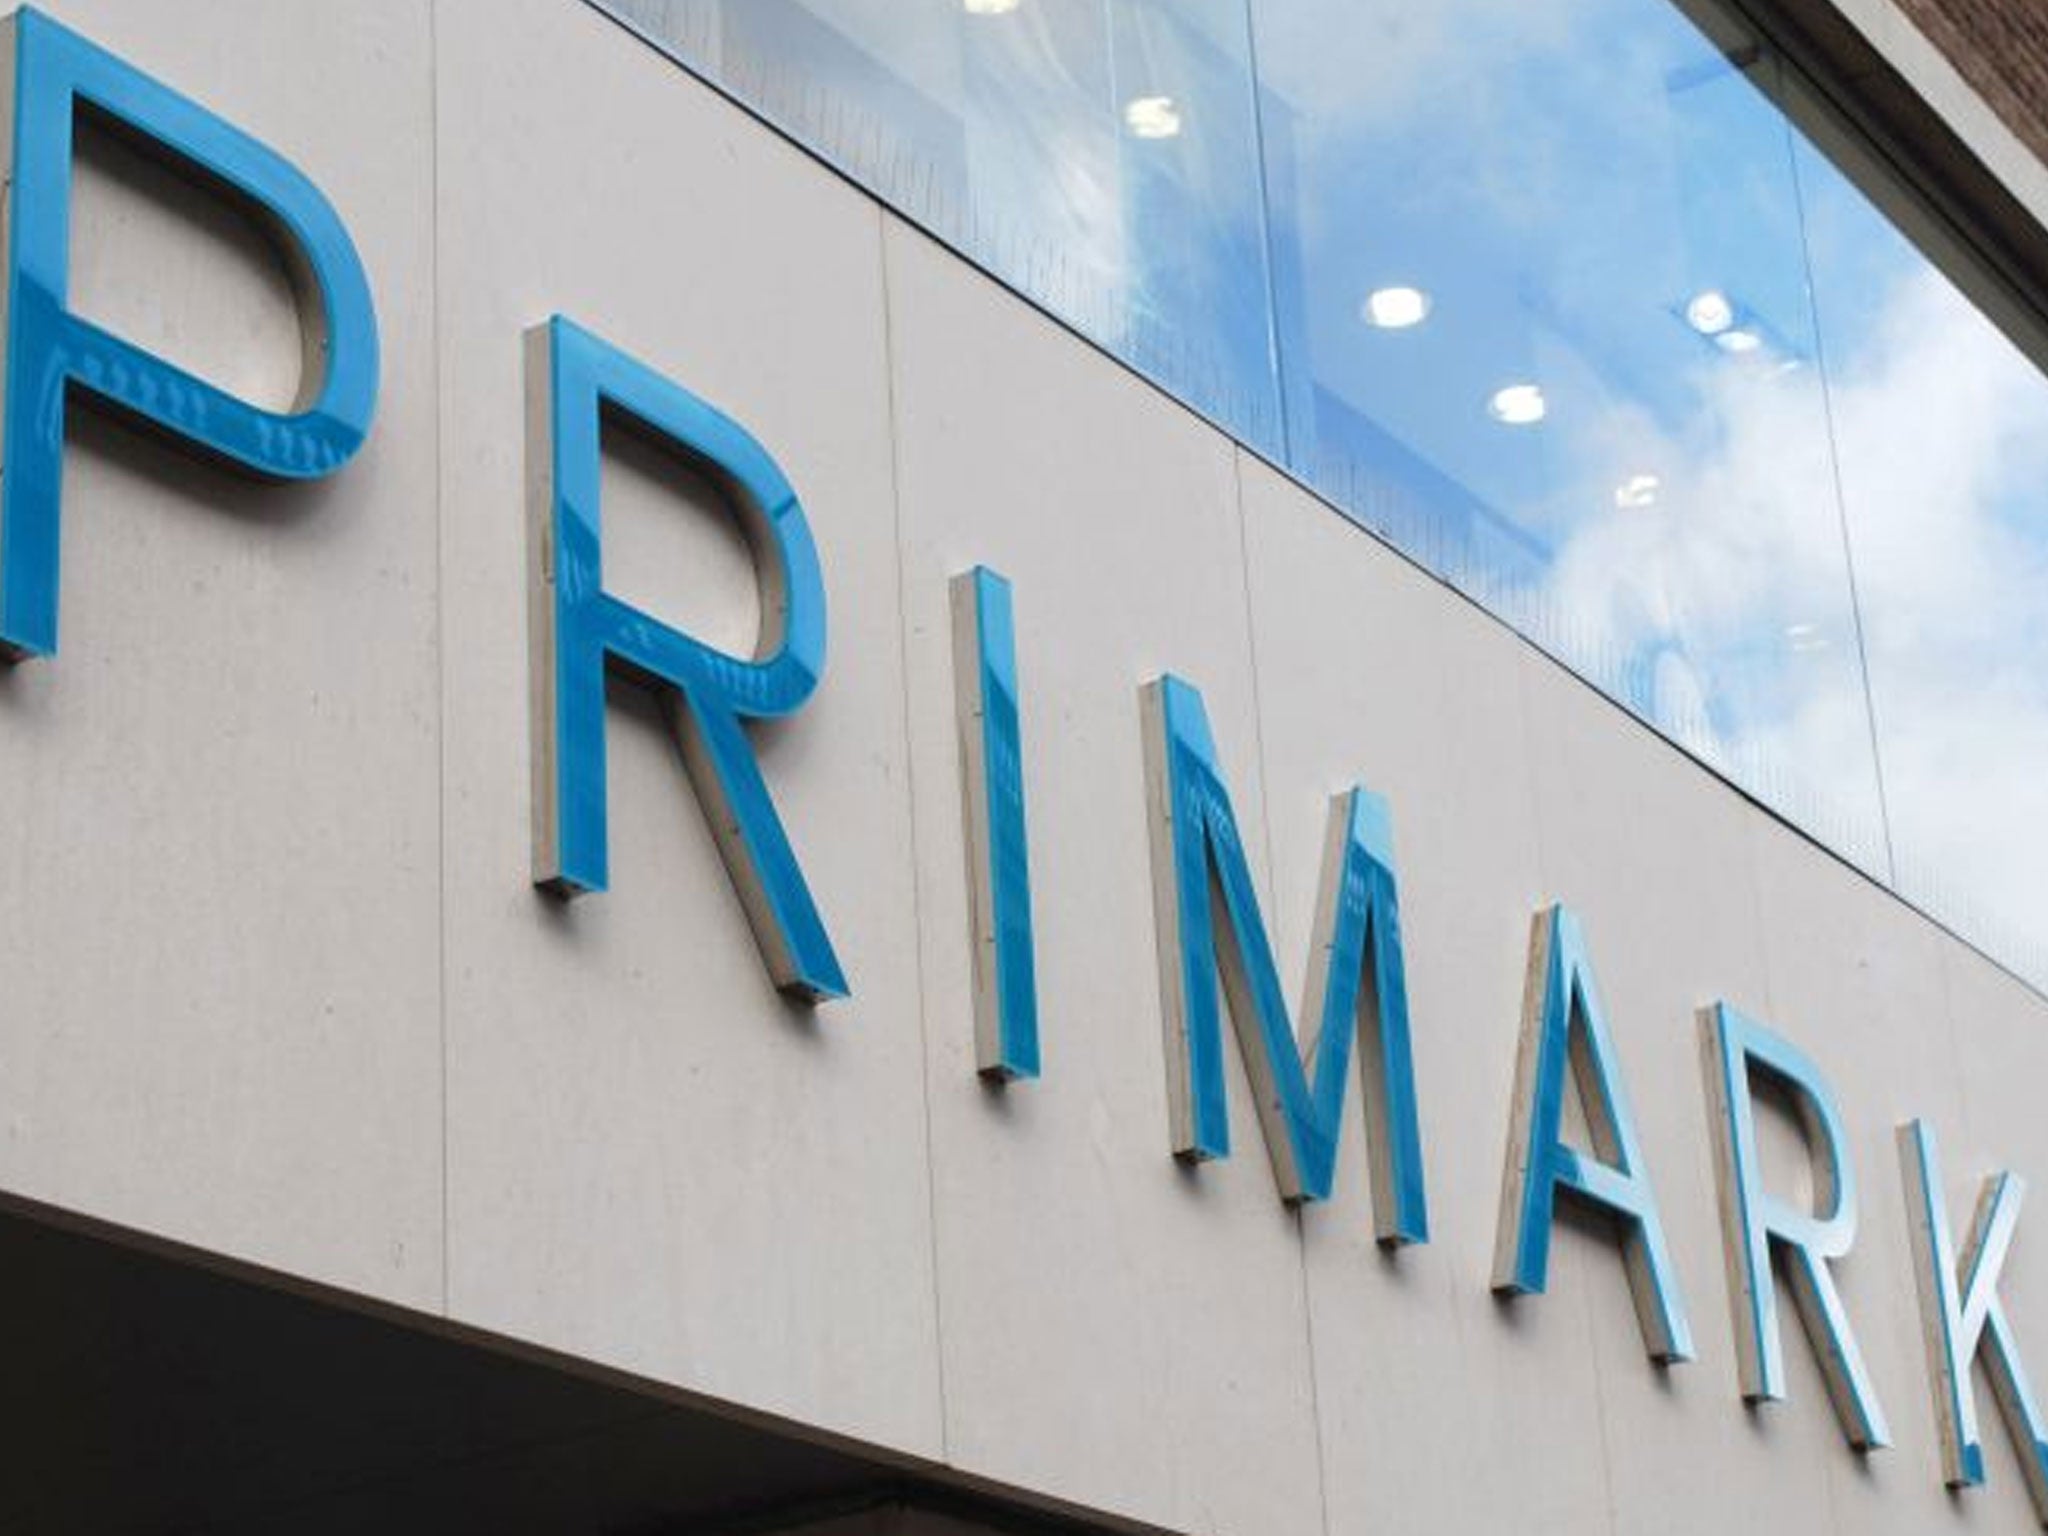 Primark saw a 14 per cent increase in sales in the 16 weeks to 4 January